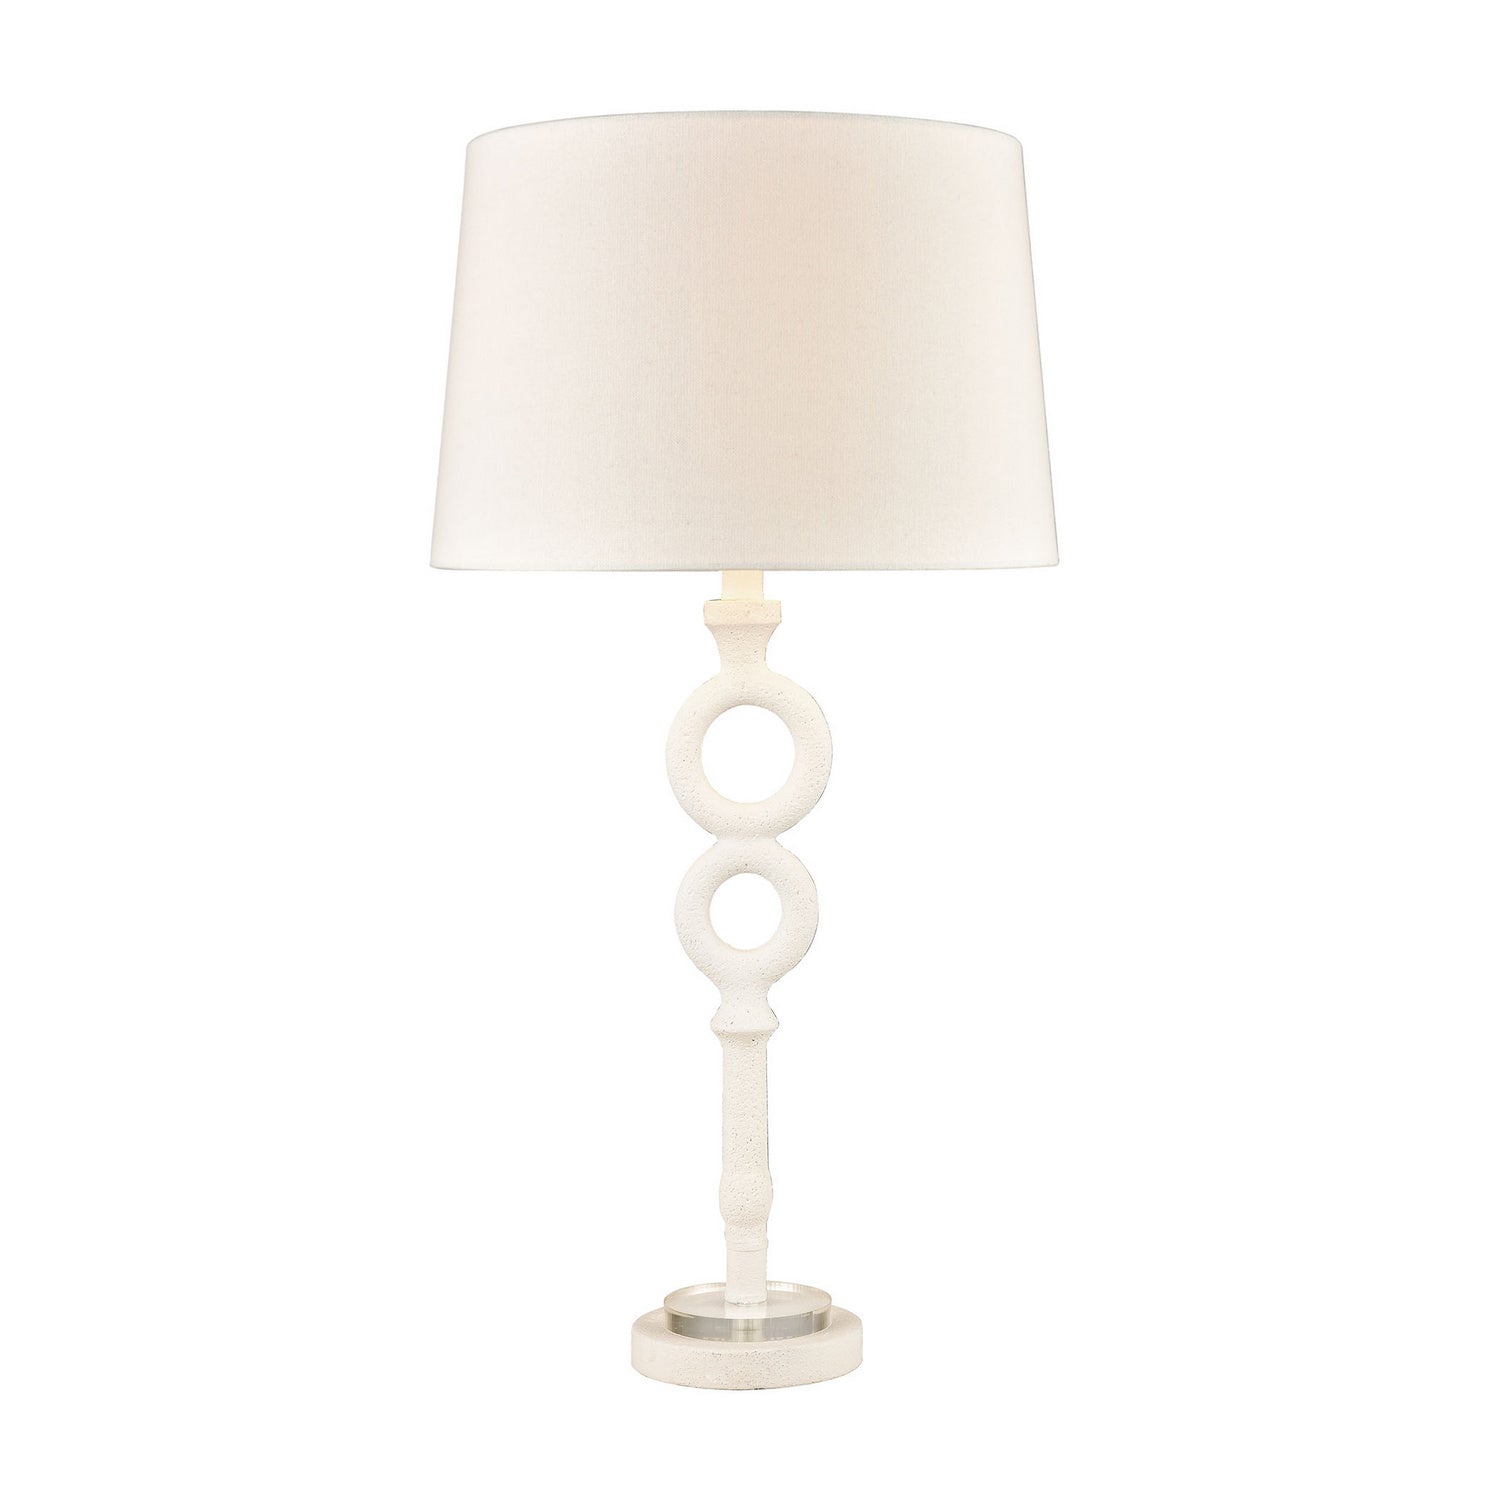 ELK Home - D4697 - One Light Table Lamp - Hammered Home - Matte White